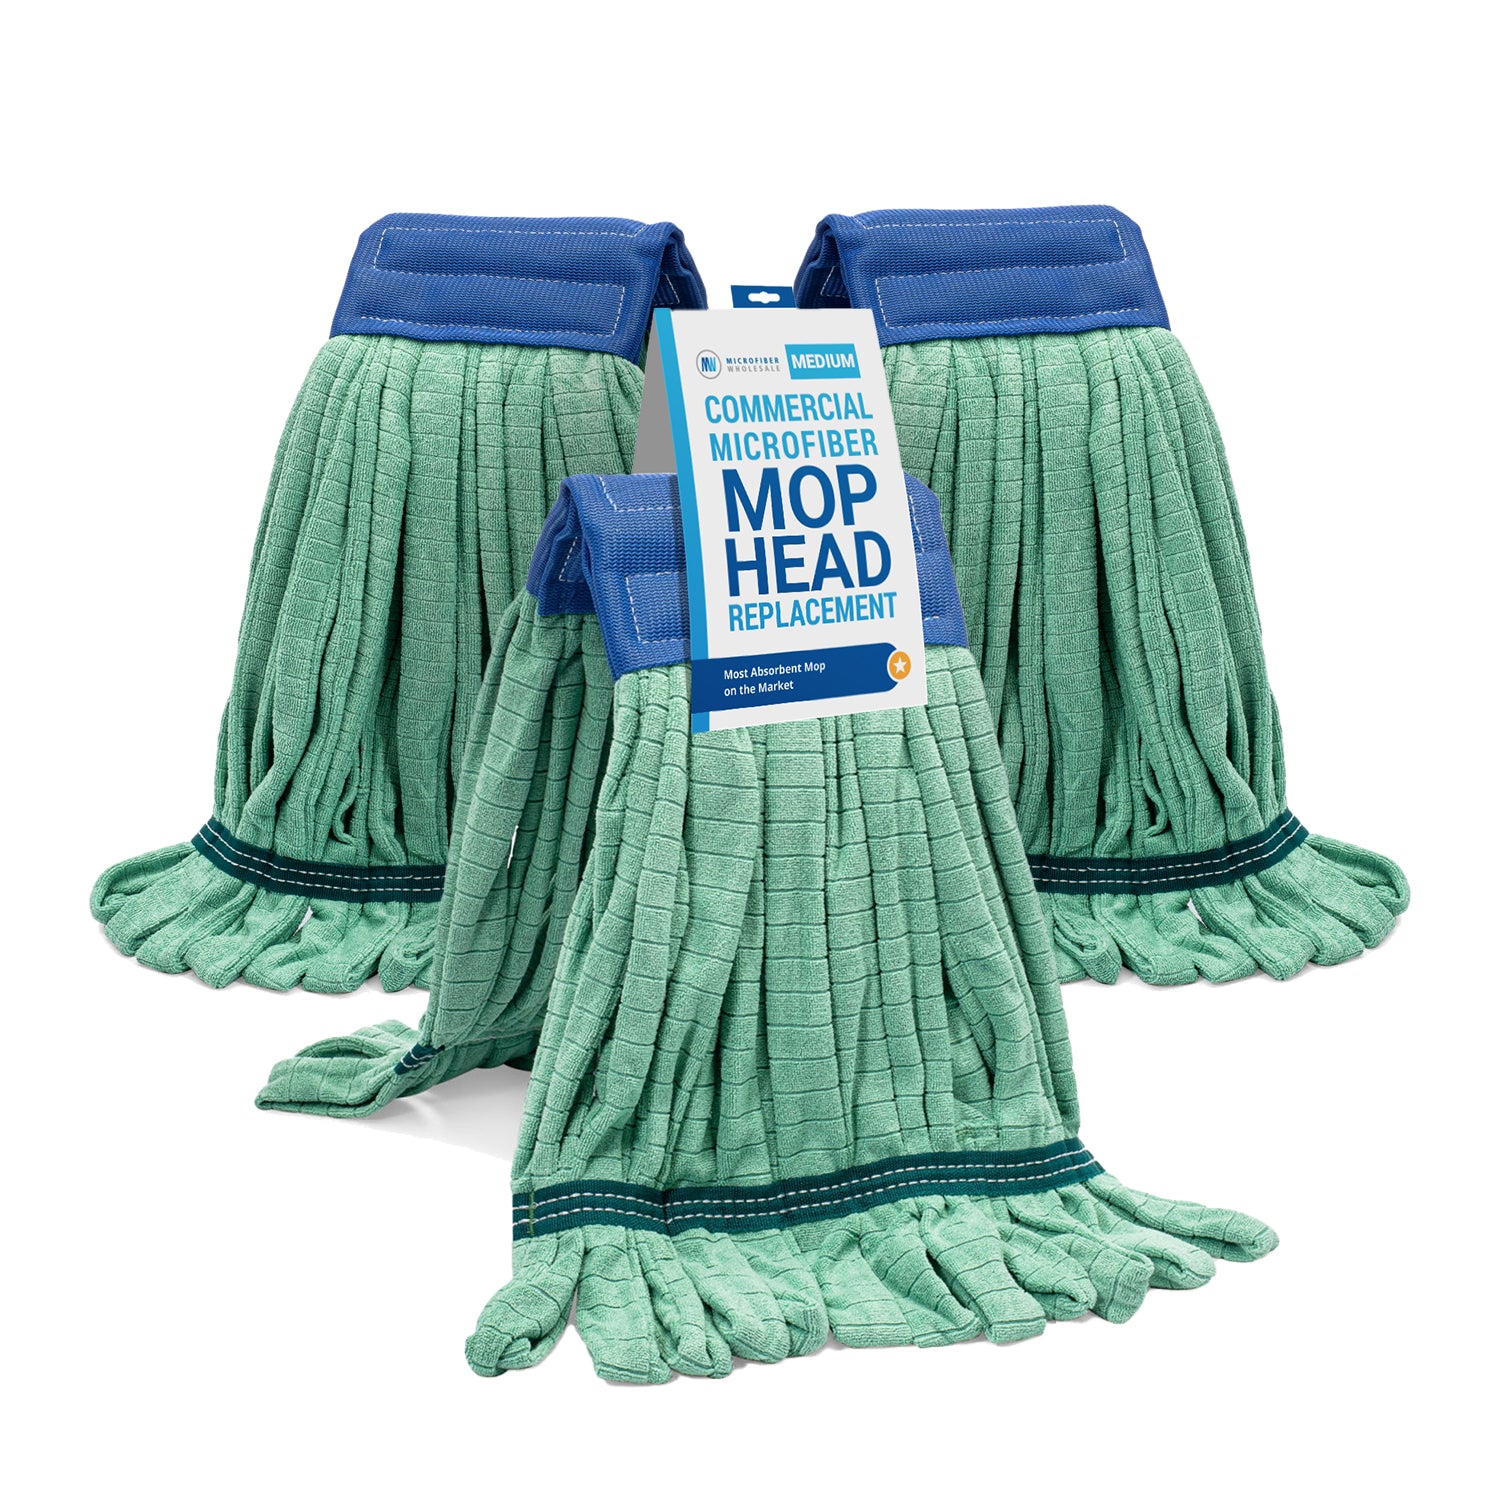 Large Commercial Microfiber Tube Mop - Pack of 3